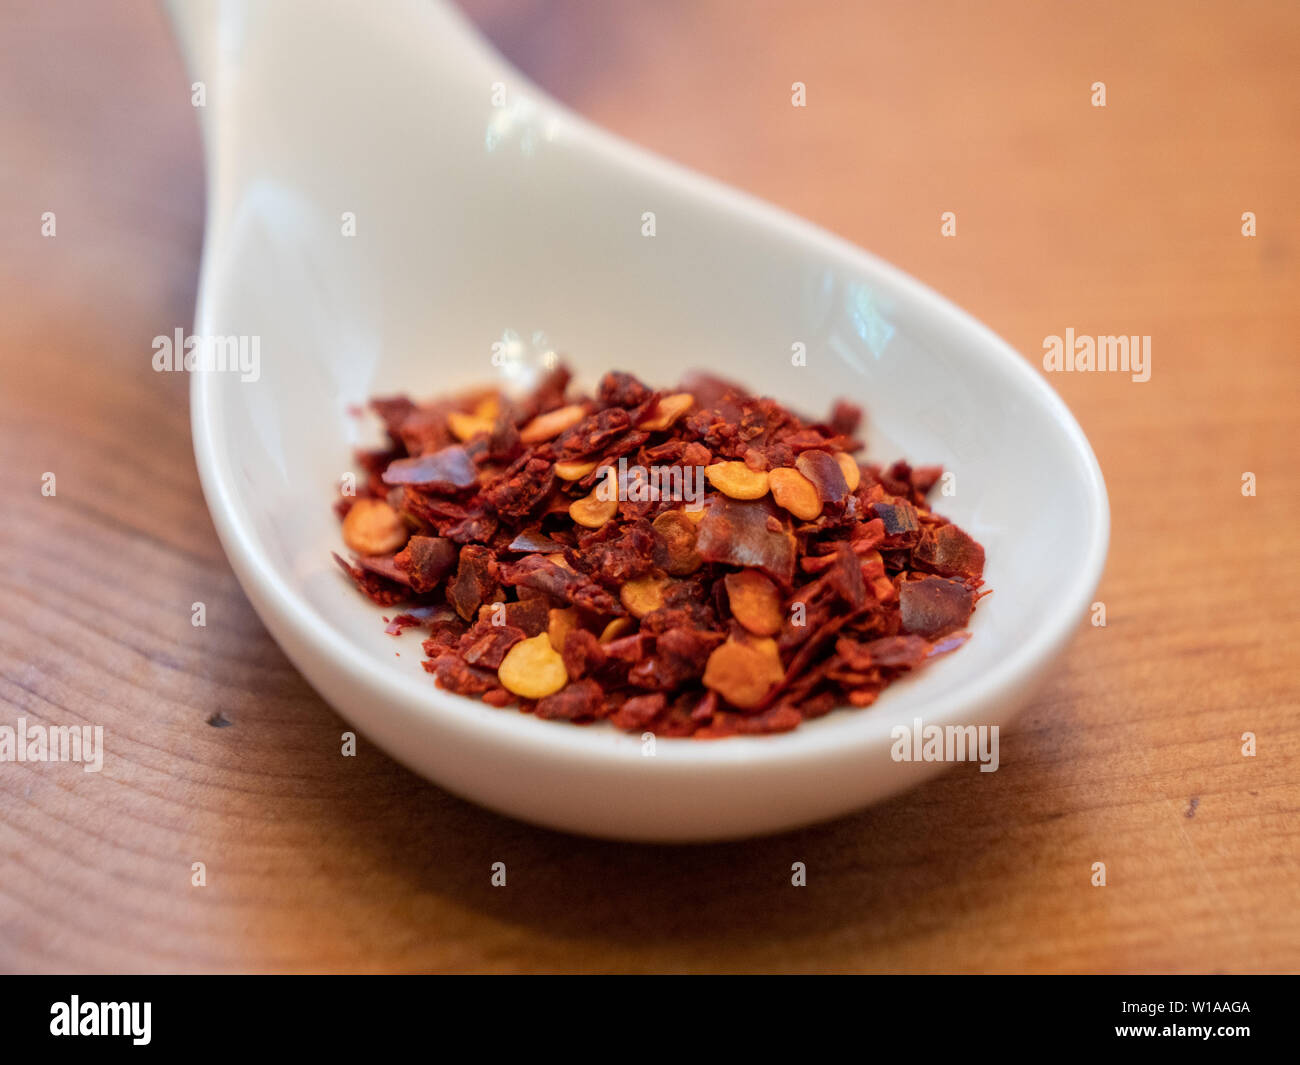 Turkish Red Pepper Flakes in a White Porcelain Spoon on a Wood Table Stock Photo